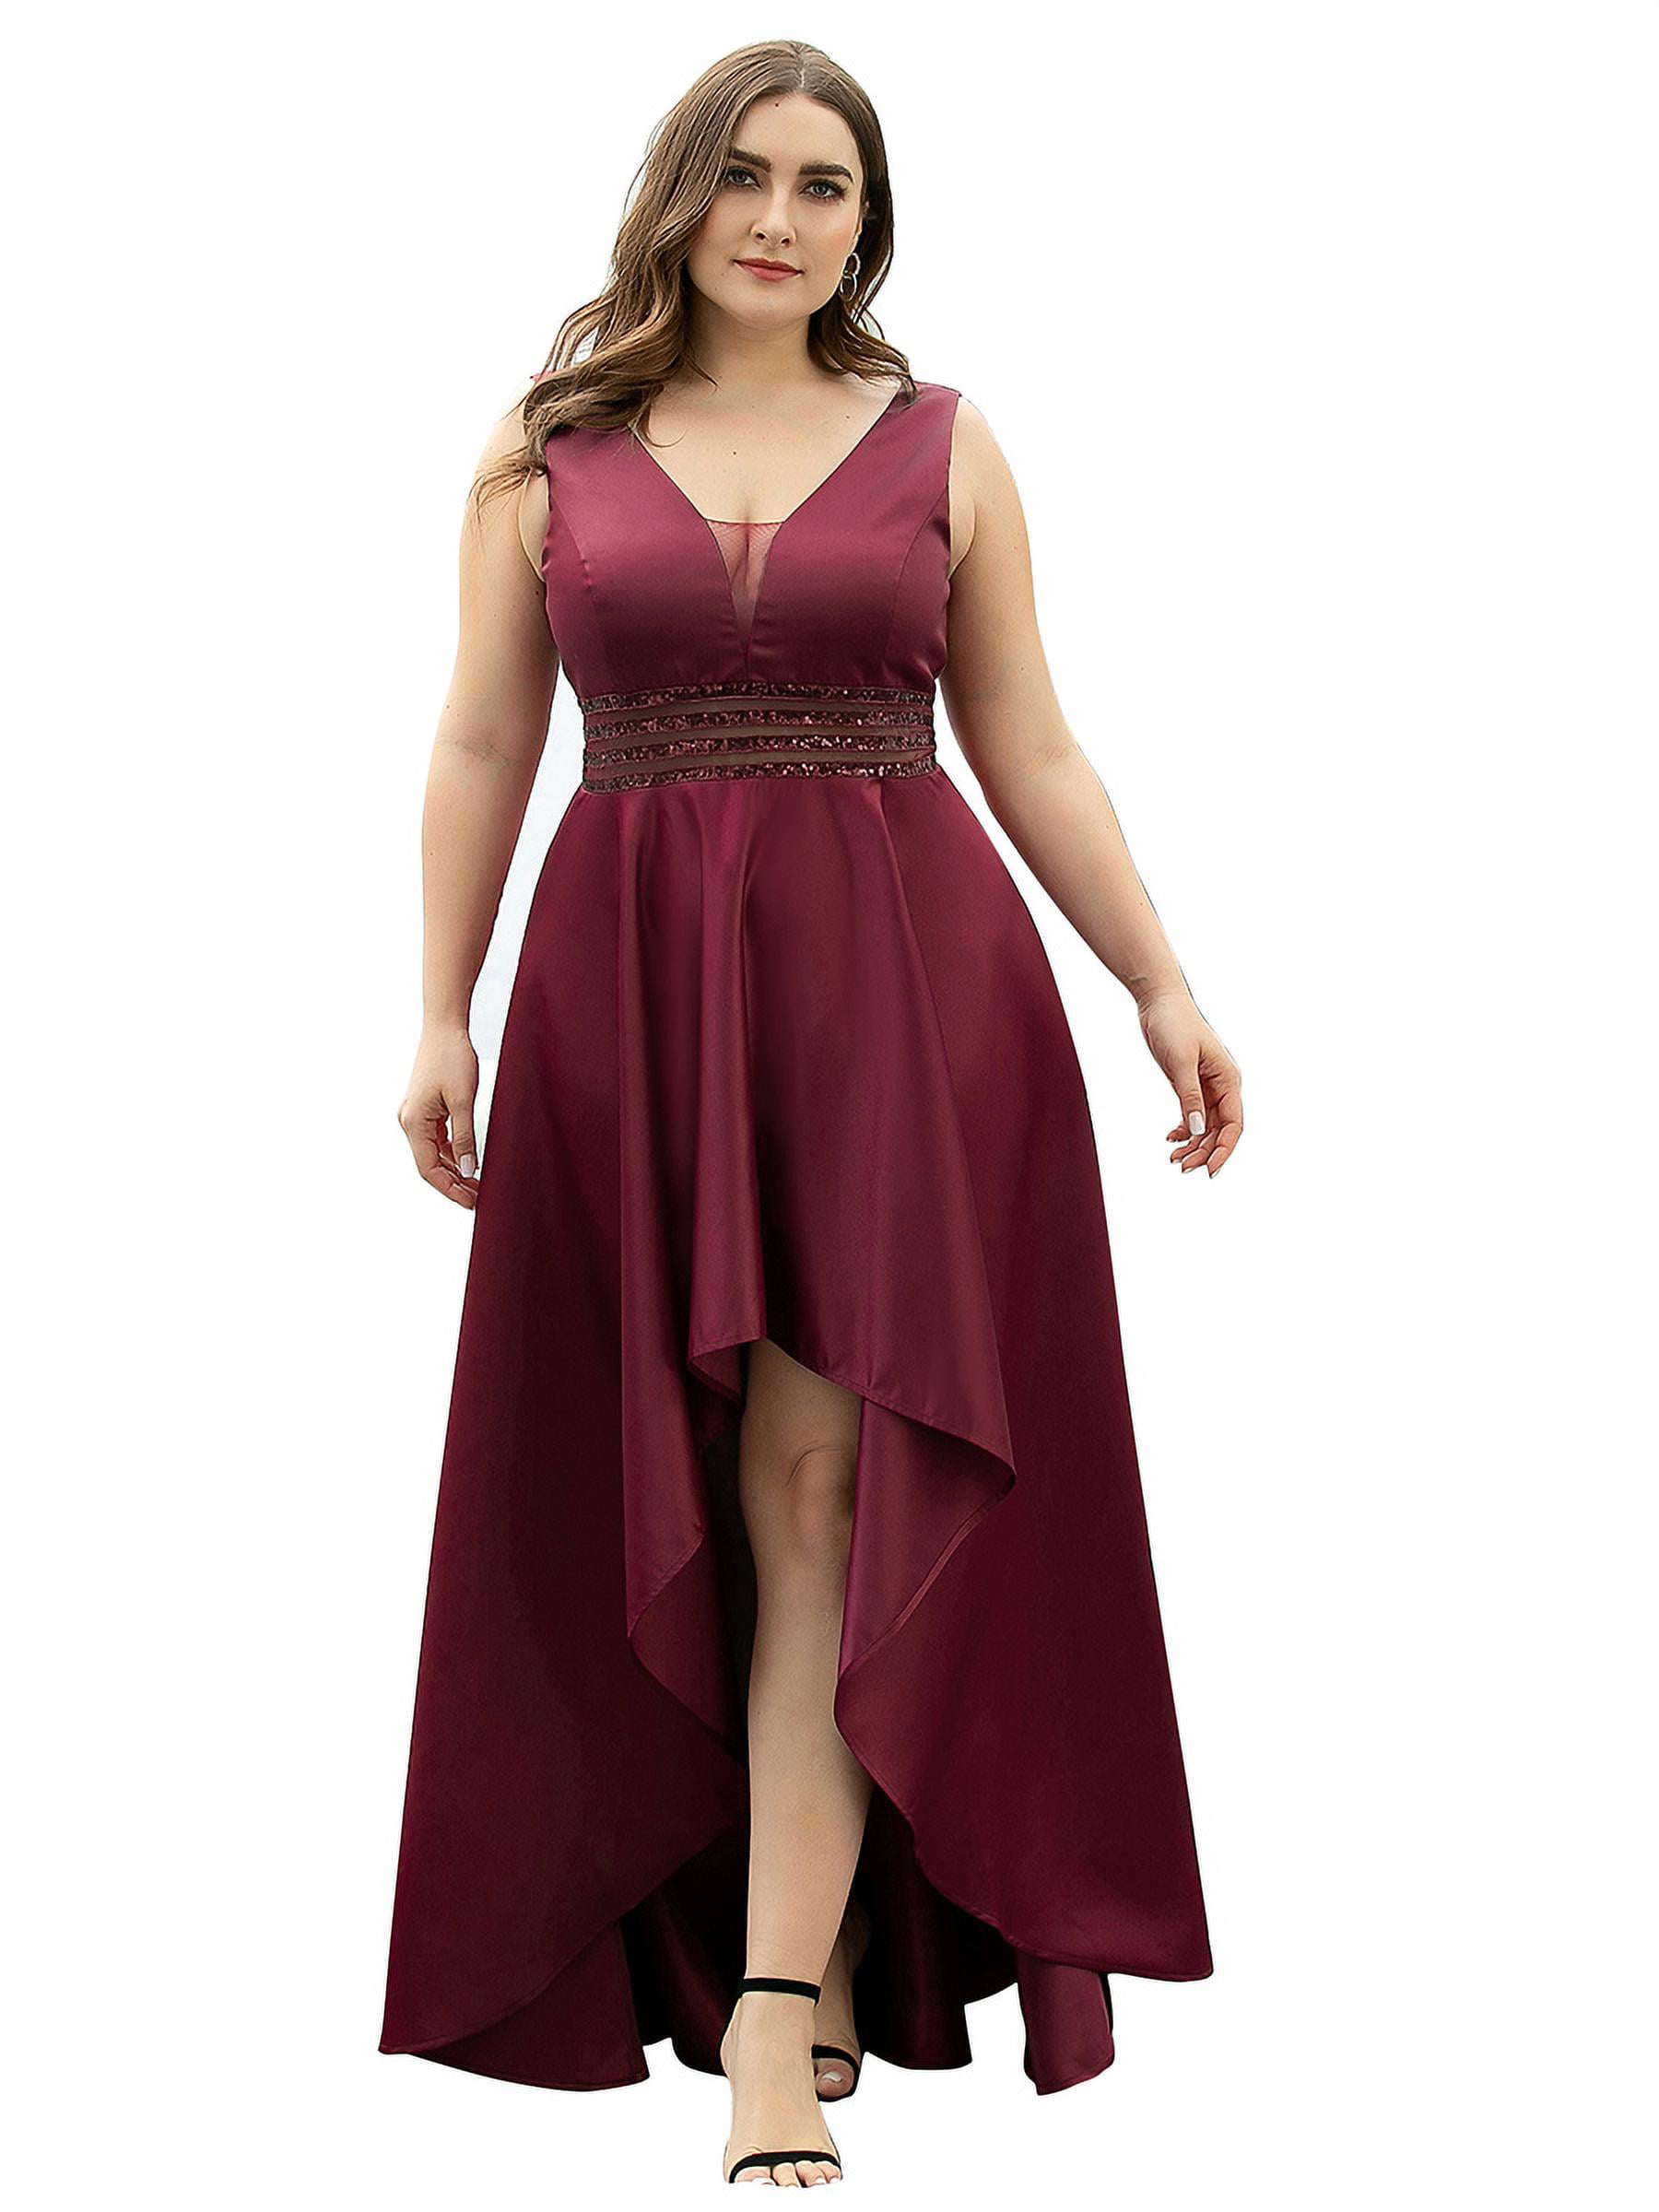 US Plus Size Long V-neck Formal Gown Cocktail Party Evening Prom Dresses 09016 